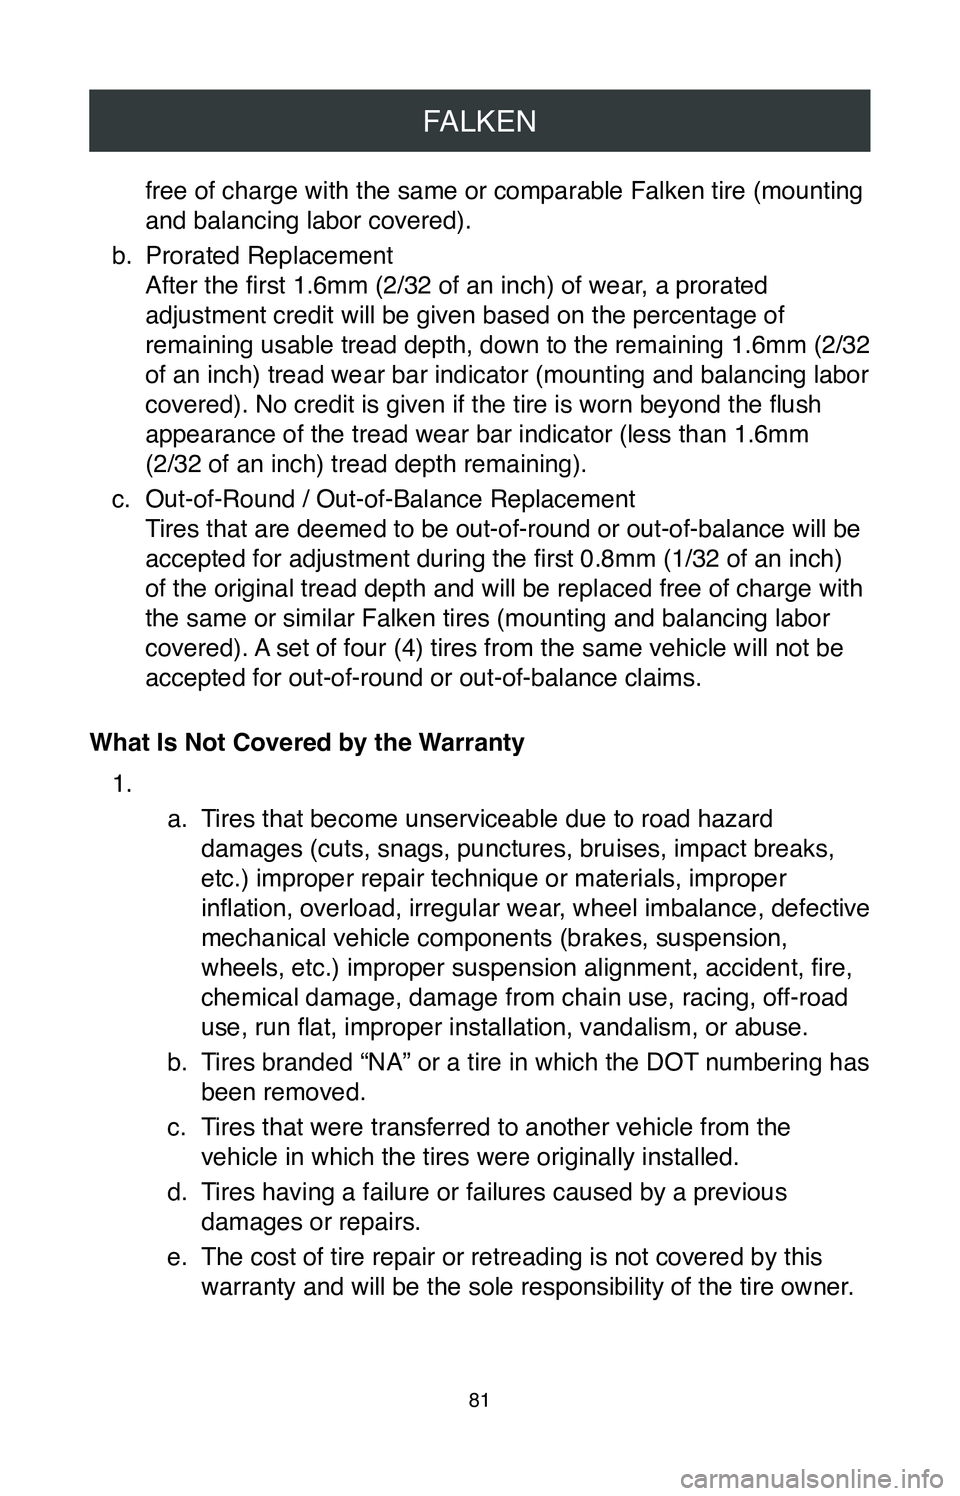 TOYOTA TUNDRA 2020  Warranties & Maintenance Guides (in English) FALKEN
81
free of charge with the same or comparable Falken tire (mounting 
and balancing labor covered).
b.
 Prorated Replacement 
After the first 1.6mm (2/32 of an inch) of wear, a prorated 
adjustm